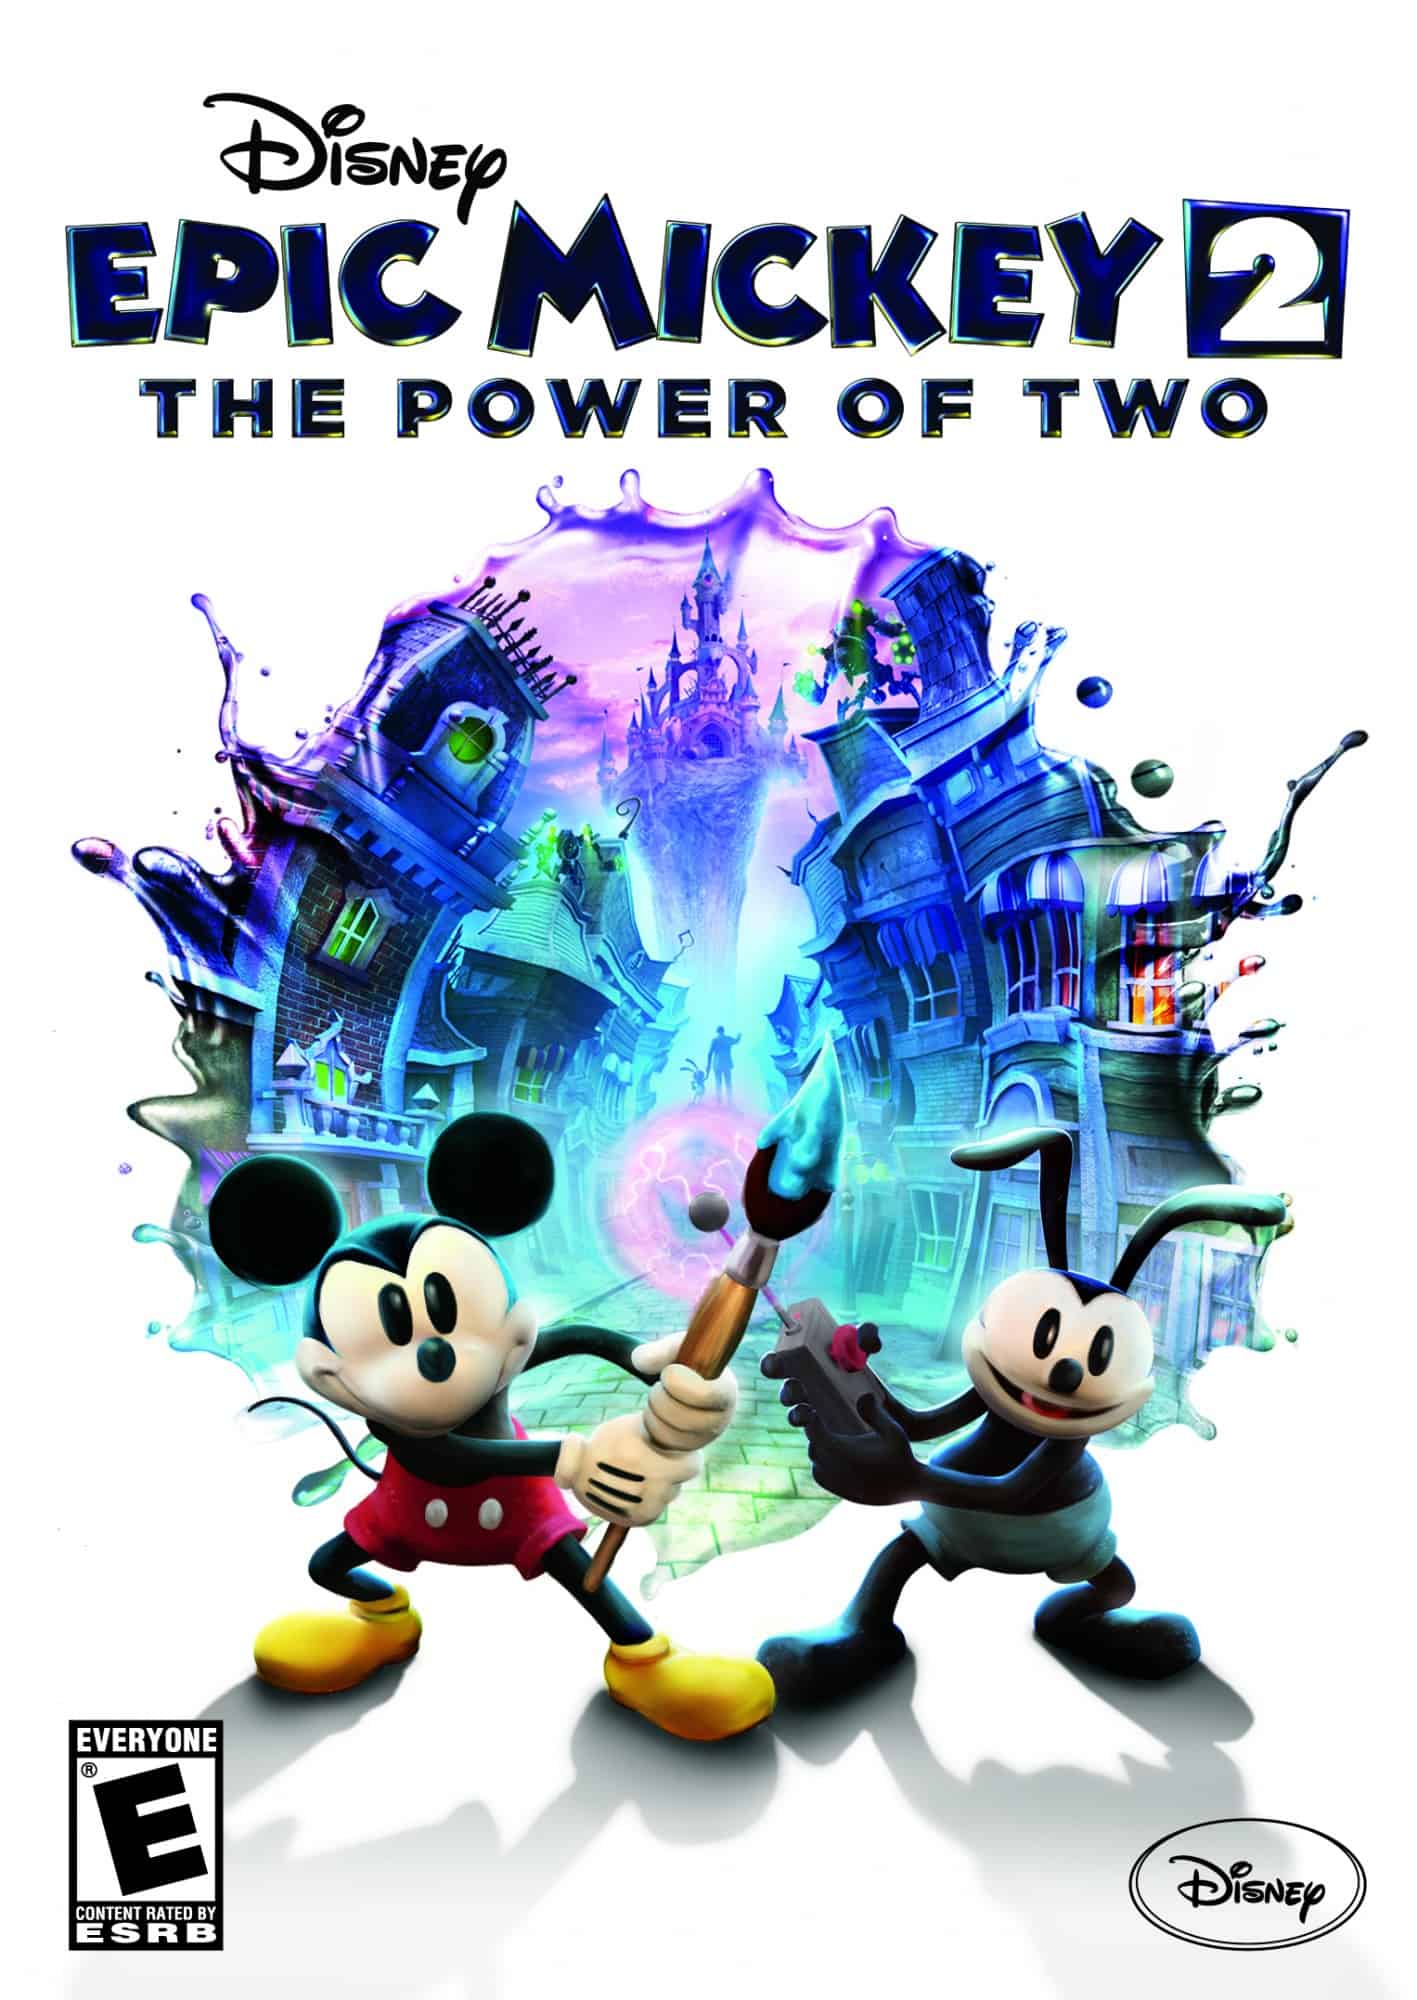 Epic Mickey 2 The Power of Two game giveaway